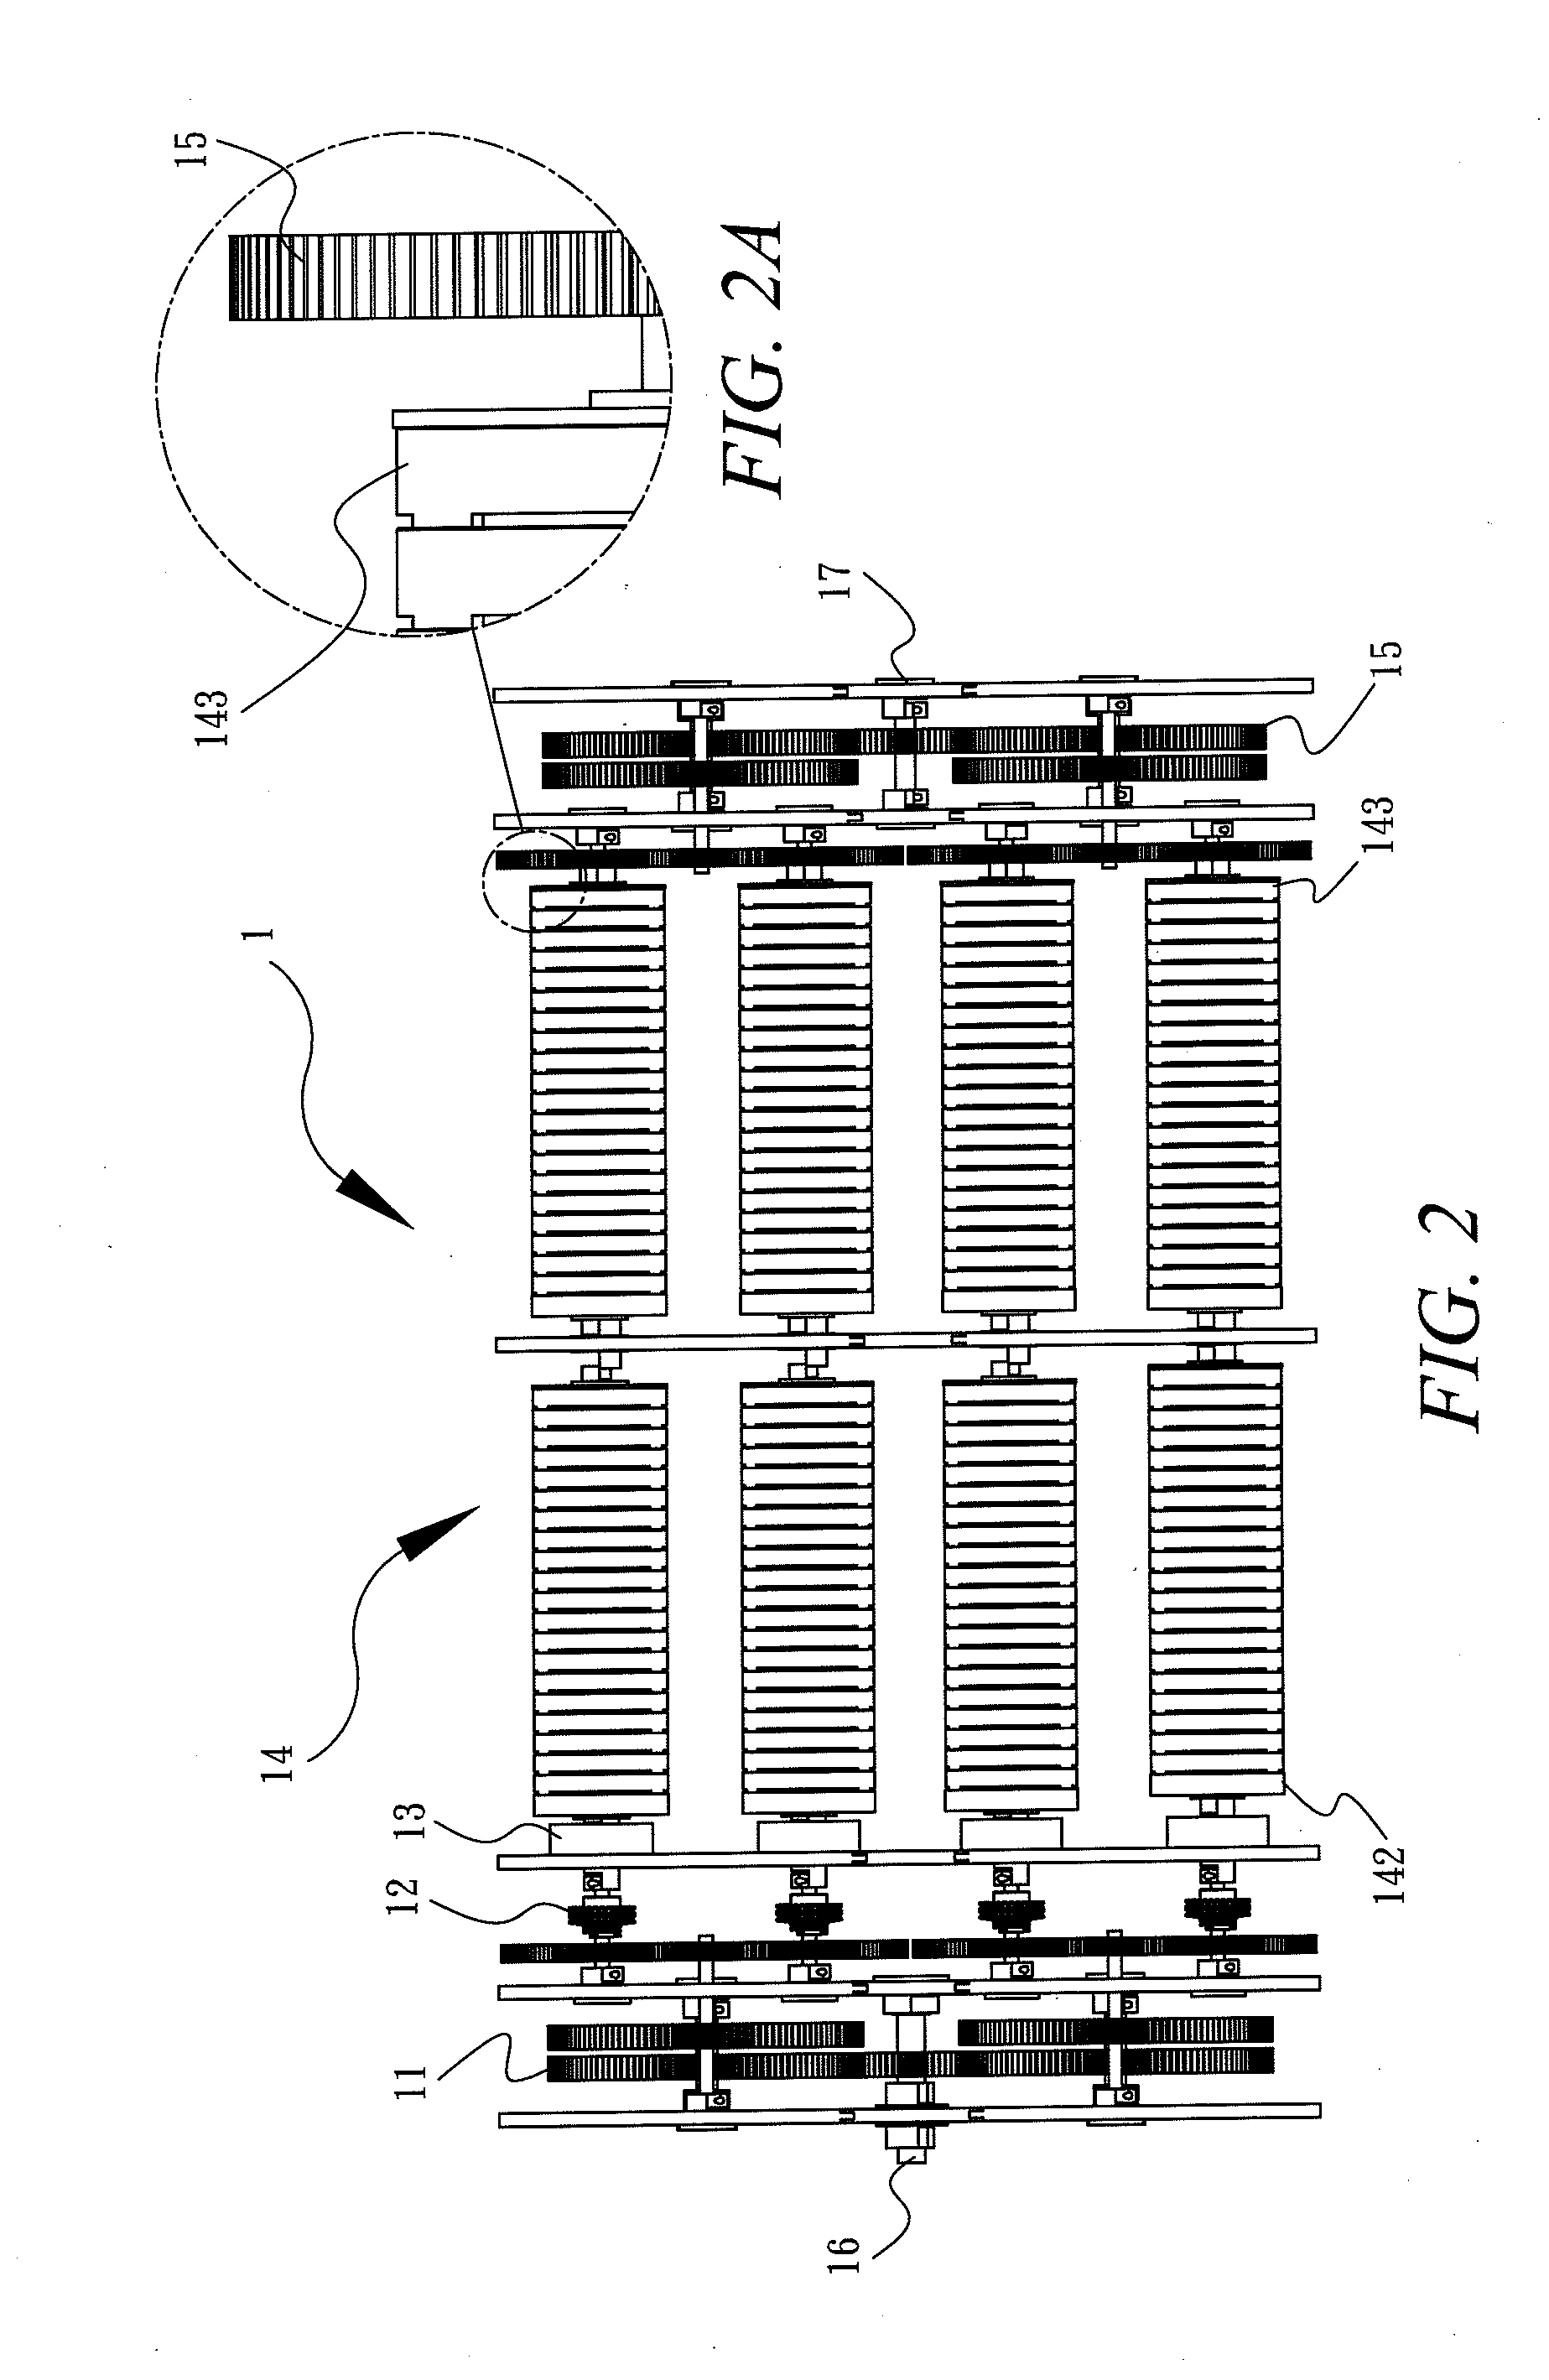 Energy storing device in which energy is stored through spring torsion